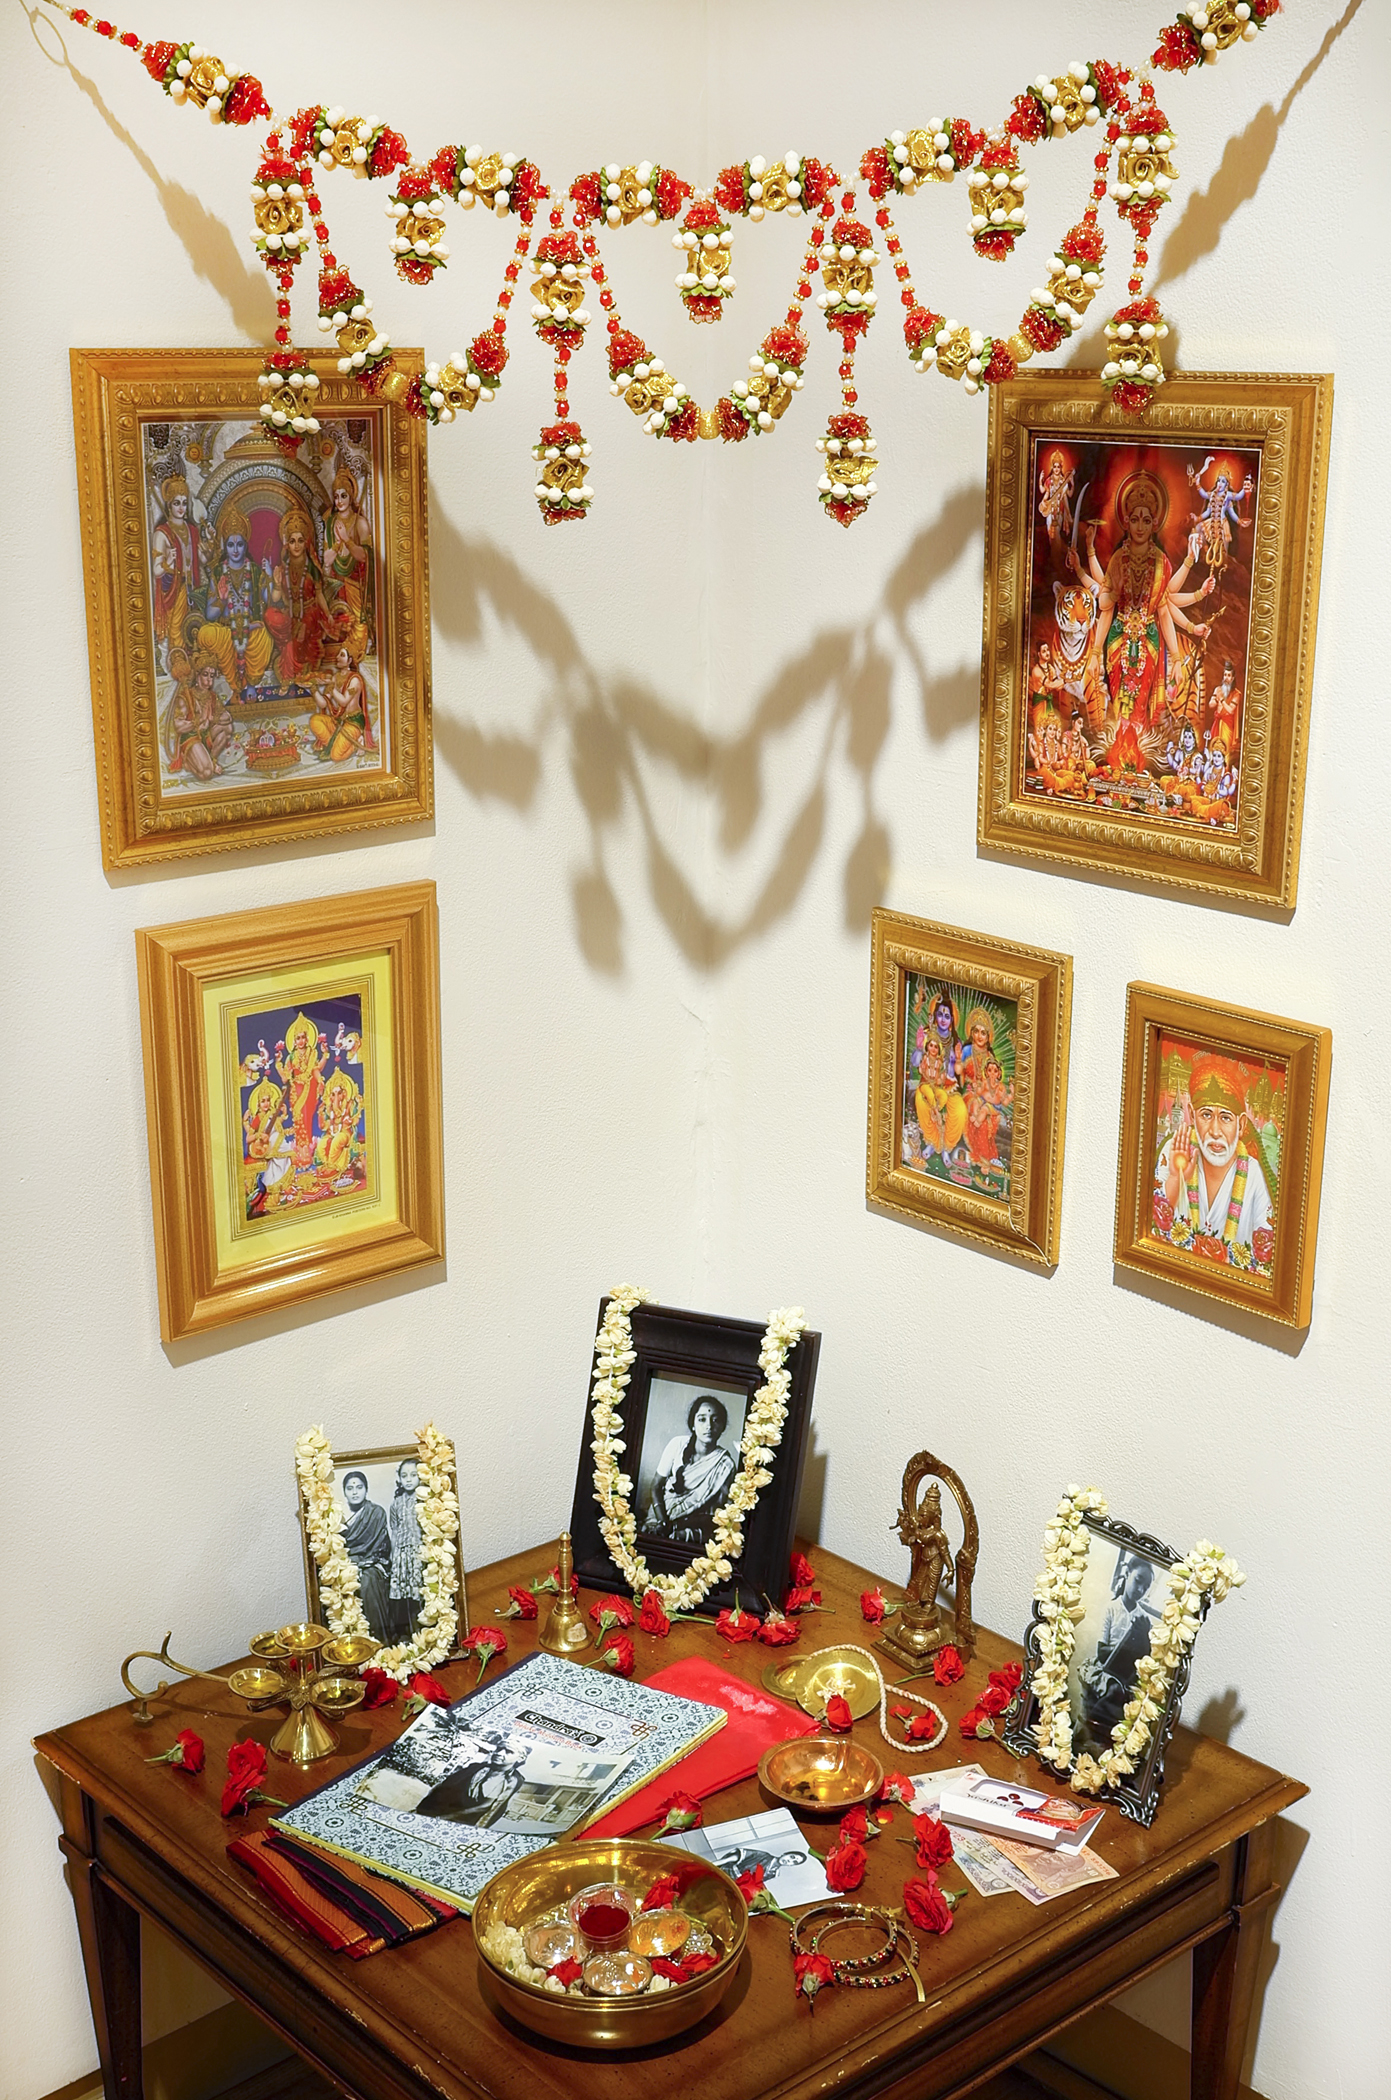 Lakshmi Ramgopal, Maalai, 2017. Table, written materials, framed photographs and prints, brass bowl, mixed metal statuette, hand bell, mp3 player, speakers. The devotional materials, including framed photos, dried flower chains, and a diary, rest on a small wooden table in a corner. Five colorful framed illustrations hang on the wall above the table along with a red, yellow, green, and white flower garland. Photo courtesy of the Ukrainian Institute of Modern Art.